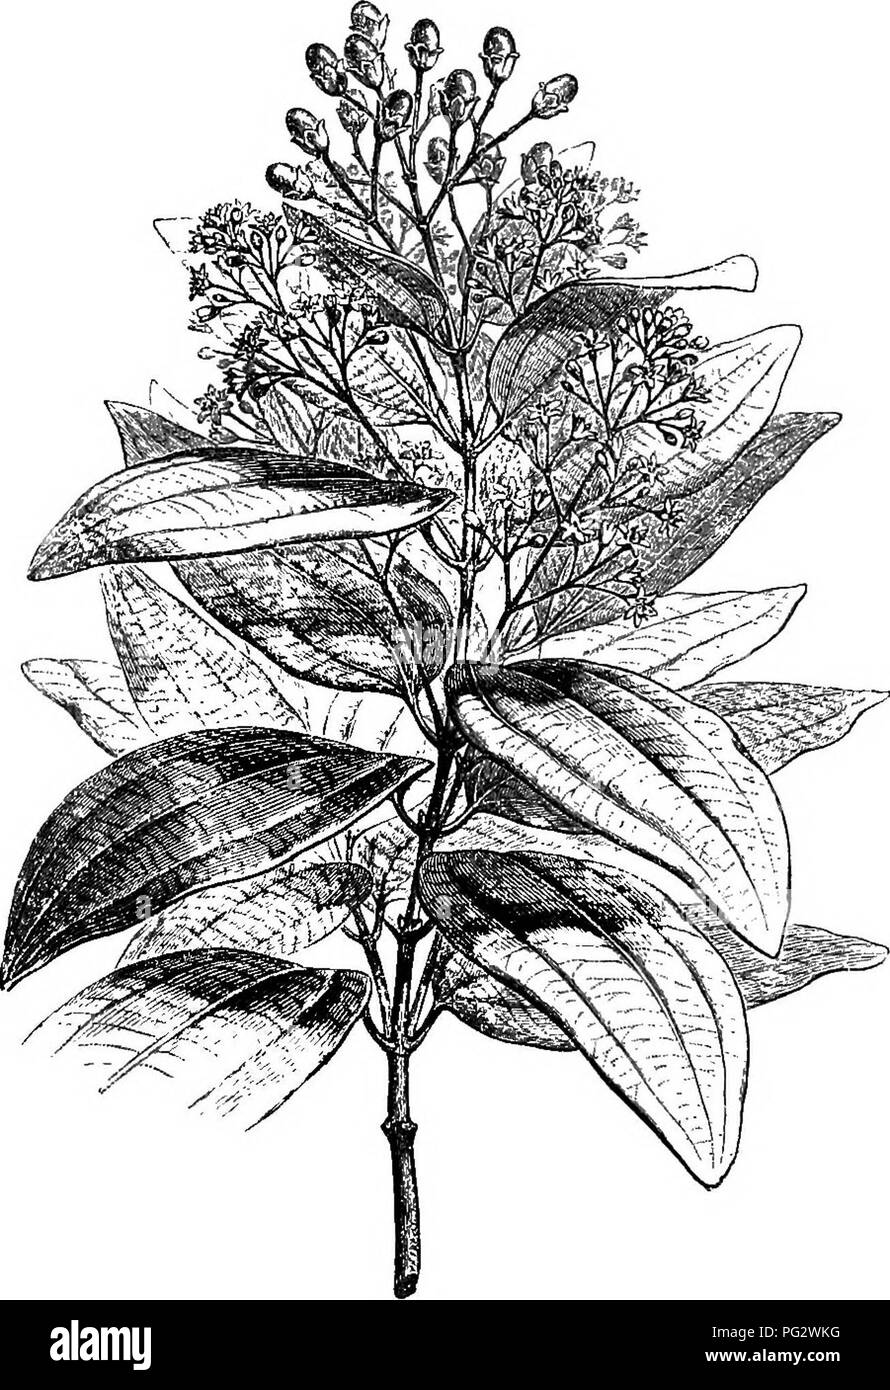 . The natural history of plants. Botany. X. LAURAOE^. I. CINNAMON SERIES. The study of this order may be commenced by the analysis of the Cinnainomv/m zeylanicam.. Pi&amp;. 240.—Floriferous branch (1). Ceylon Cinnamon-tree (figs. 240-243), the type of the genus Cinna- momum} The flowers of C. zeylanicuni are regular and hermaphrodite. ' BuBM., -FZ. Zeyl., 62.—Nees, Laur. Disp. daphne Nees, Malabatlirum BtJEM., Parthen- Irogr., 11; Systema Laurinarwm, 31.—Endi., oxylon Bl.). Gen., n. 2023.—MeiSSN., in DC. Frodr., xv. ^ Bebtn., in Bph. Nat. Our., doc. 1, ann. 4, sect. i. 9, 503 (incl.: CajnpJior Stock Photo